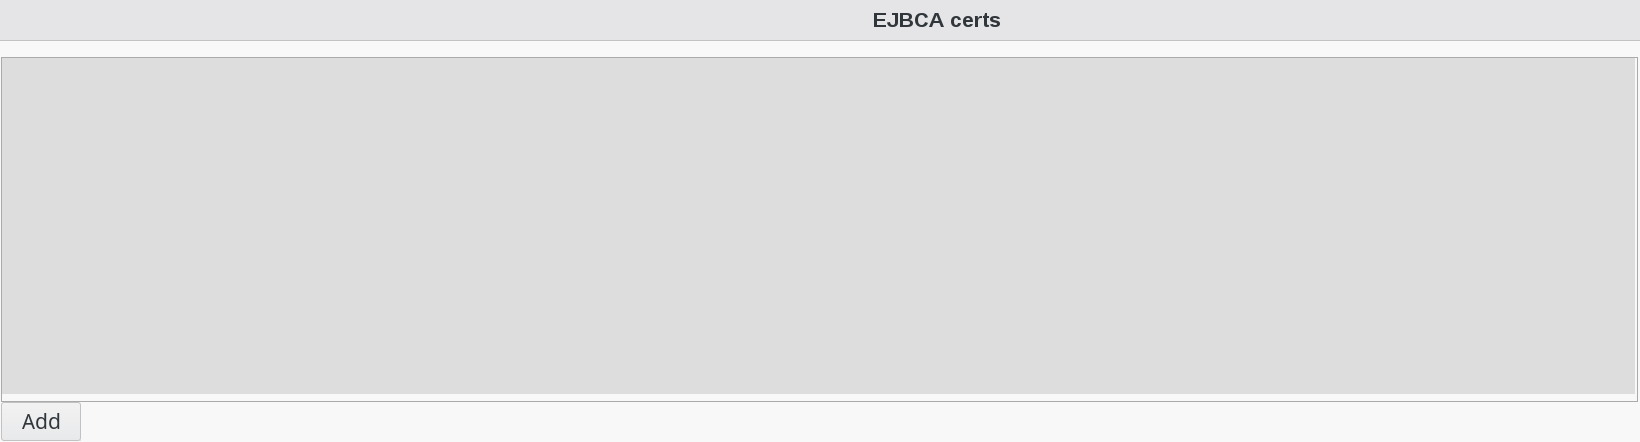 Picture of EJBCA certs window in FusionDirectory